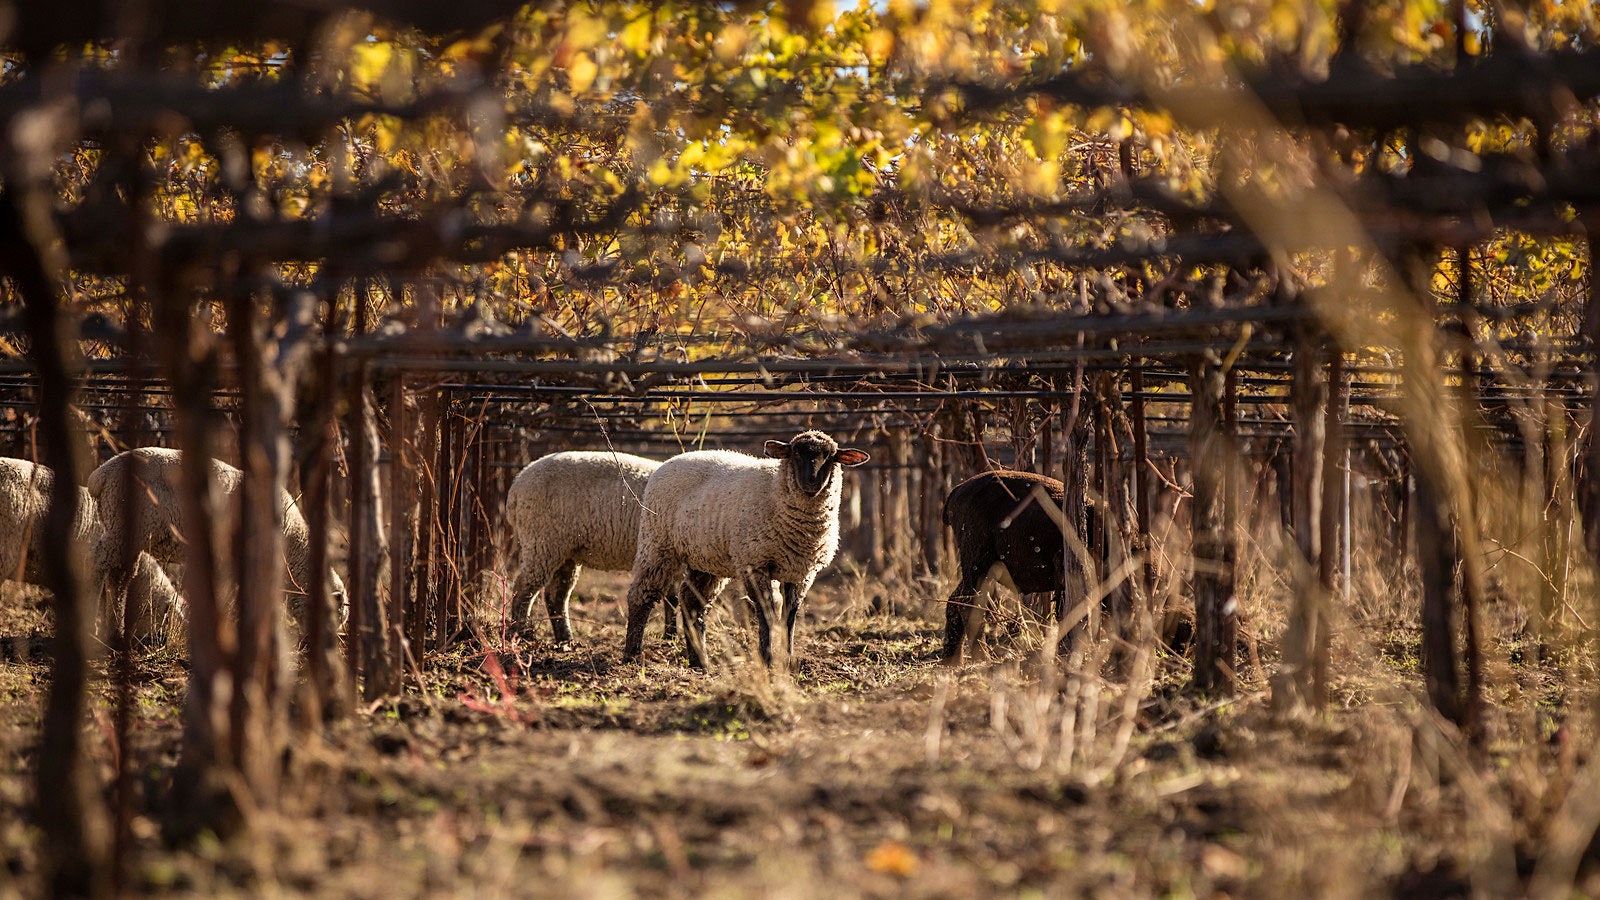  Sheep grazing amid the vines in one of Bonterra's vineyards